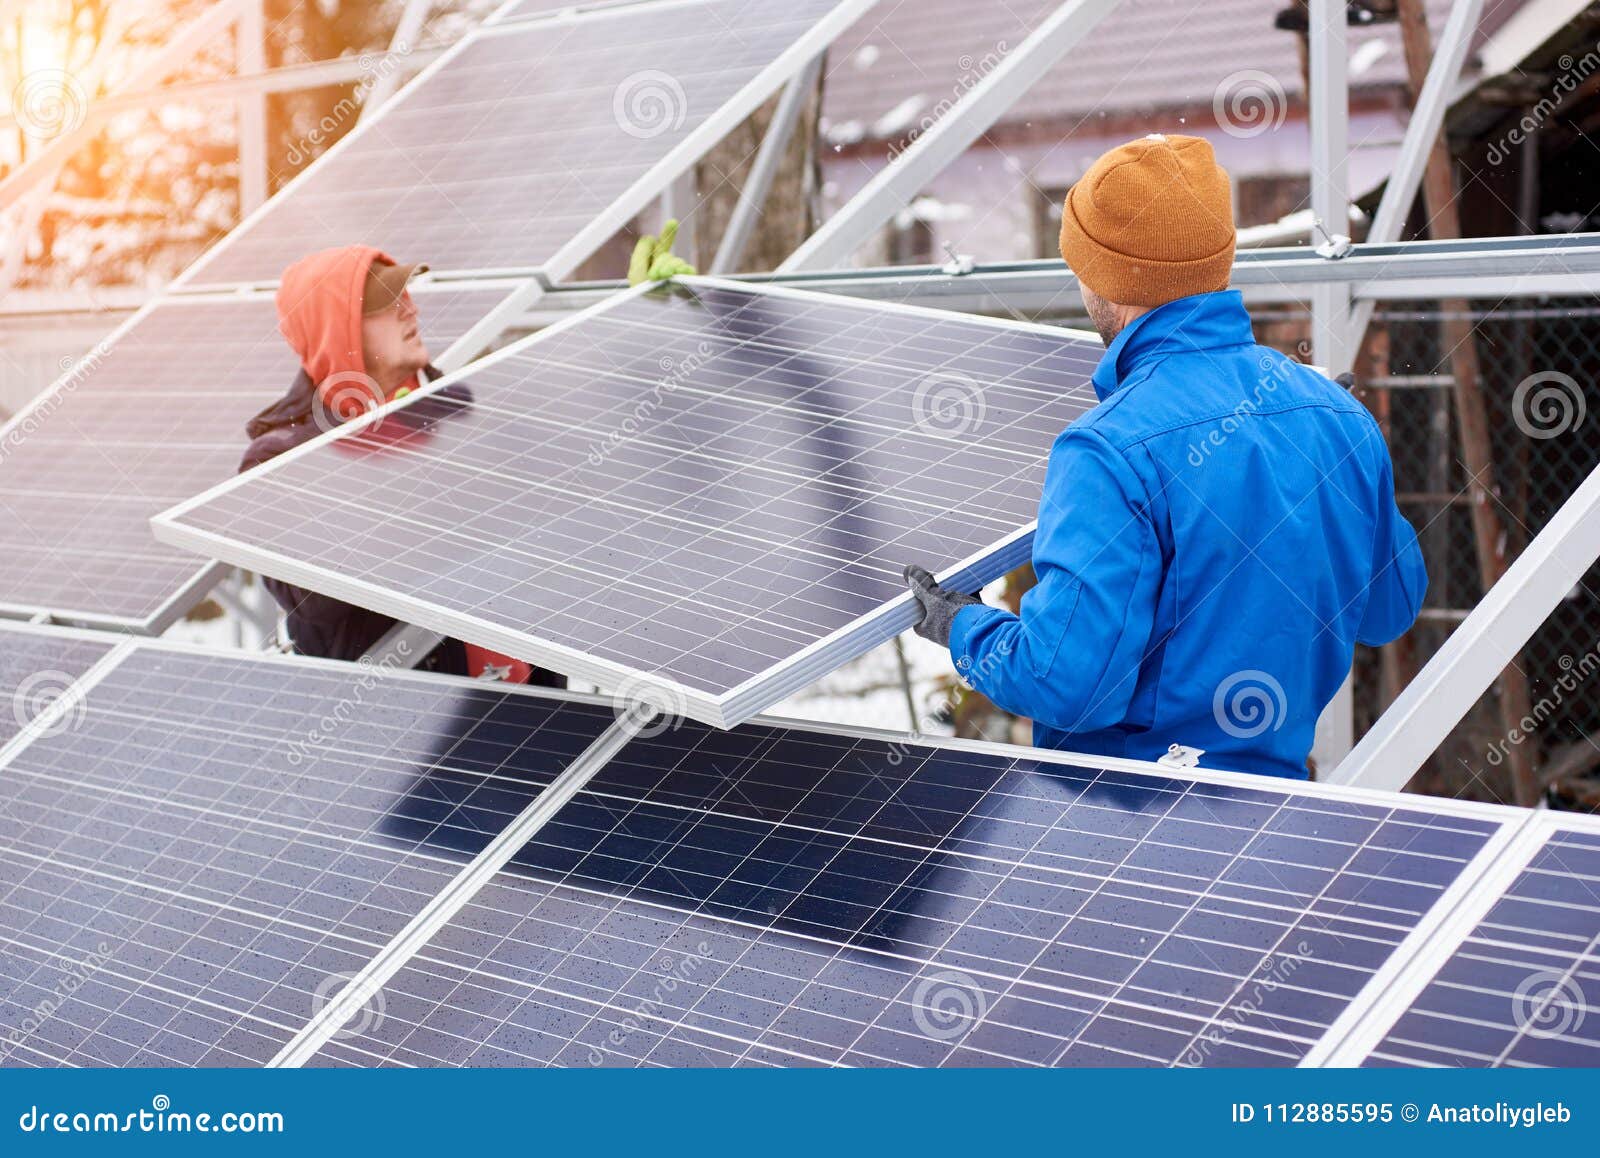 Photovoltaic panels on the roof with snow, with a snow shovel in